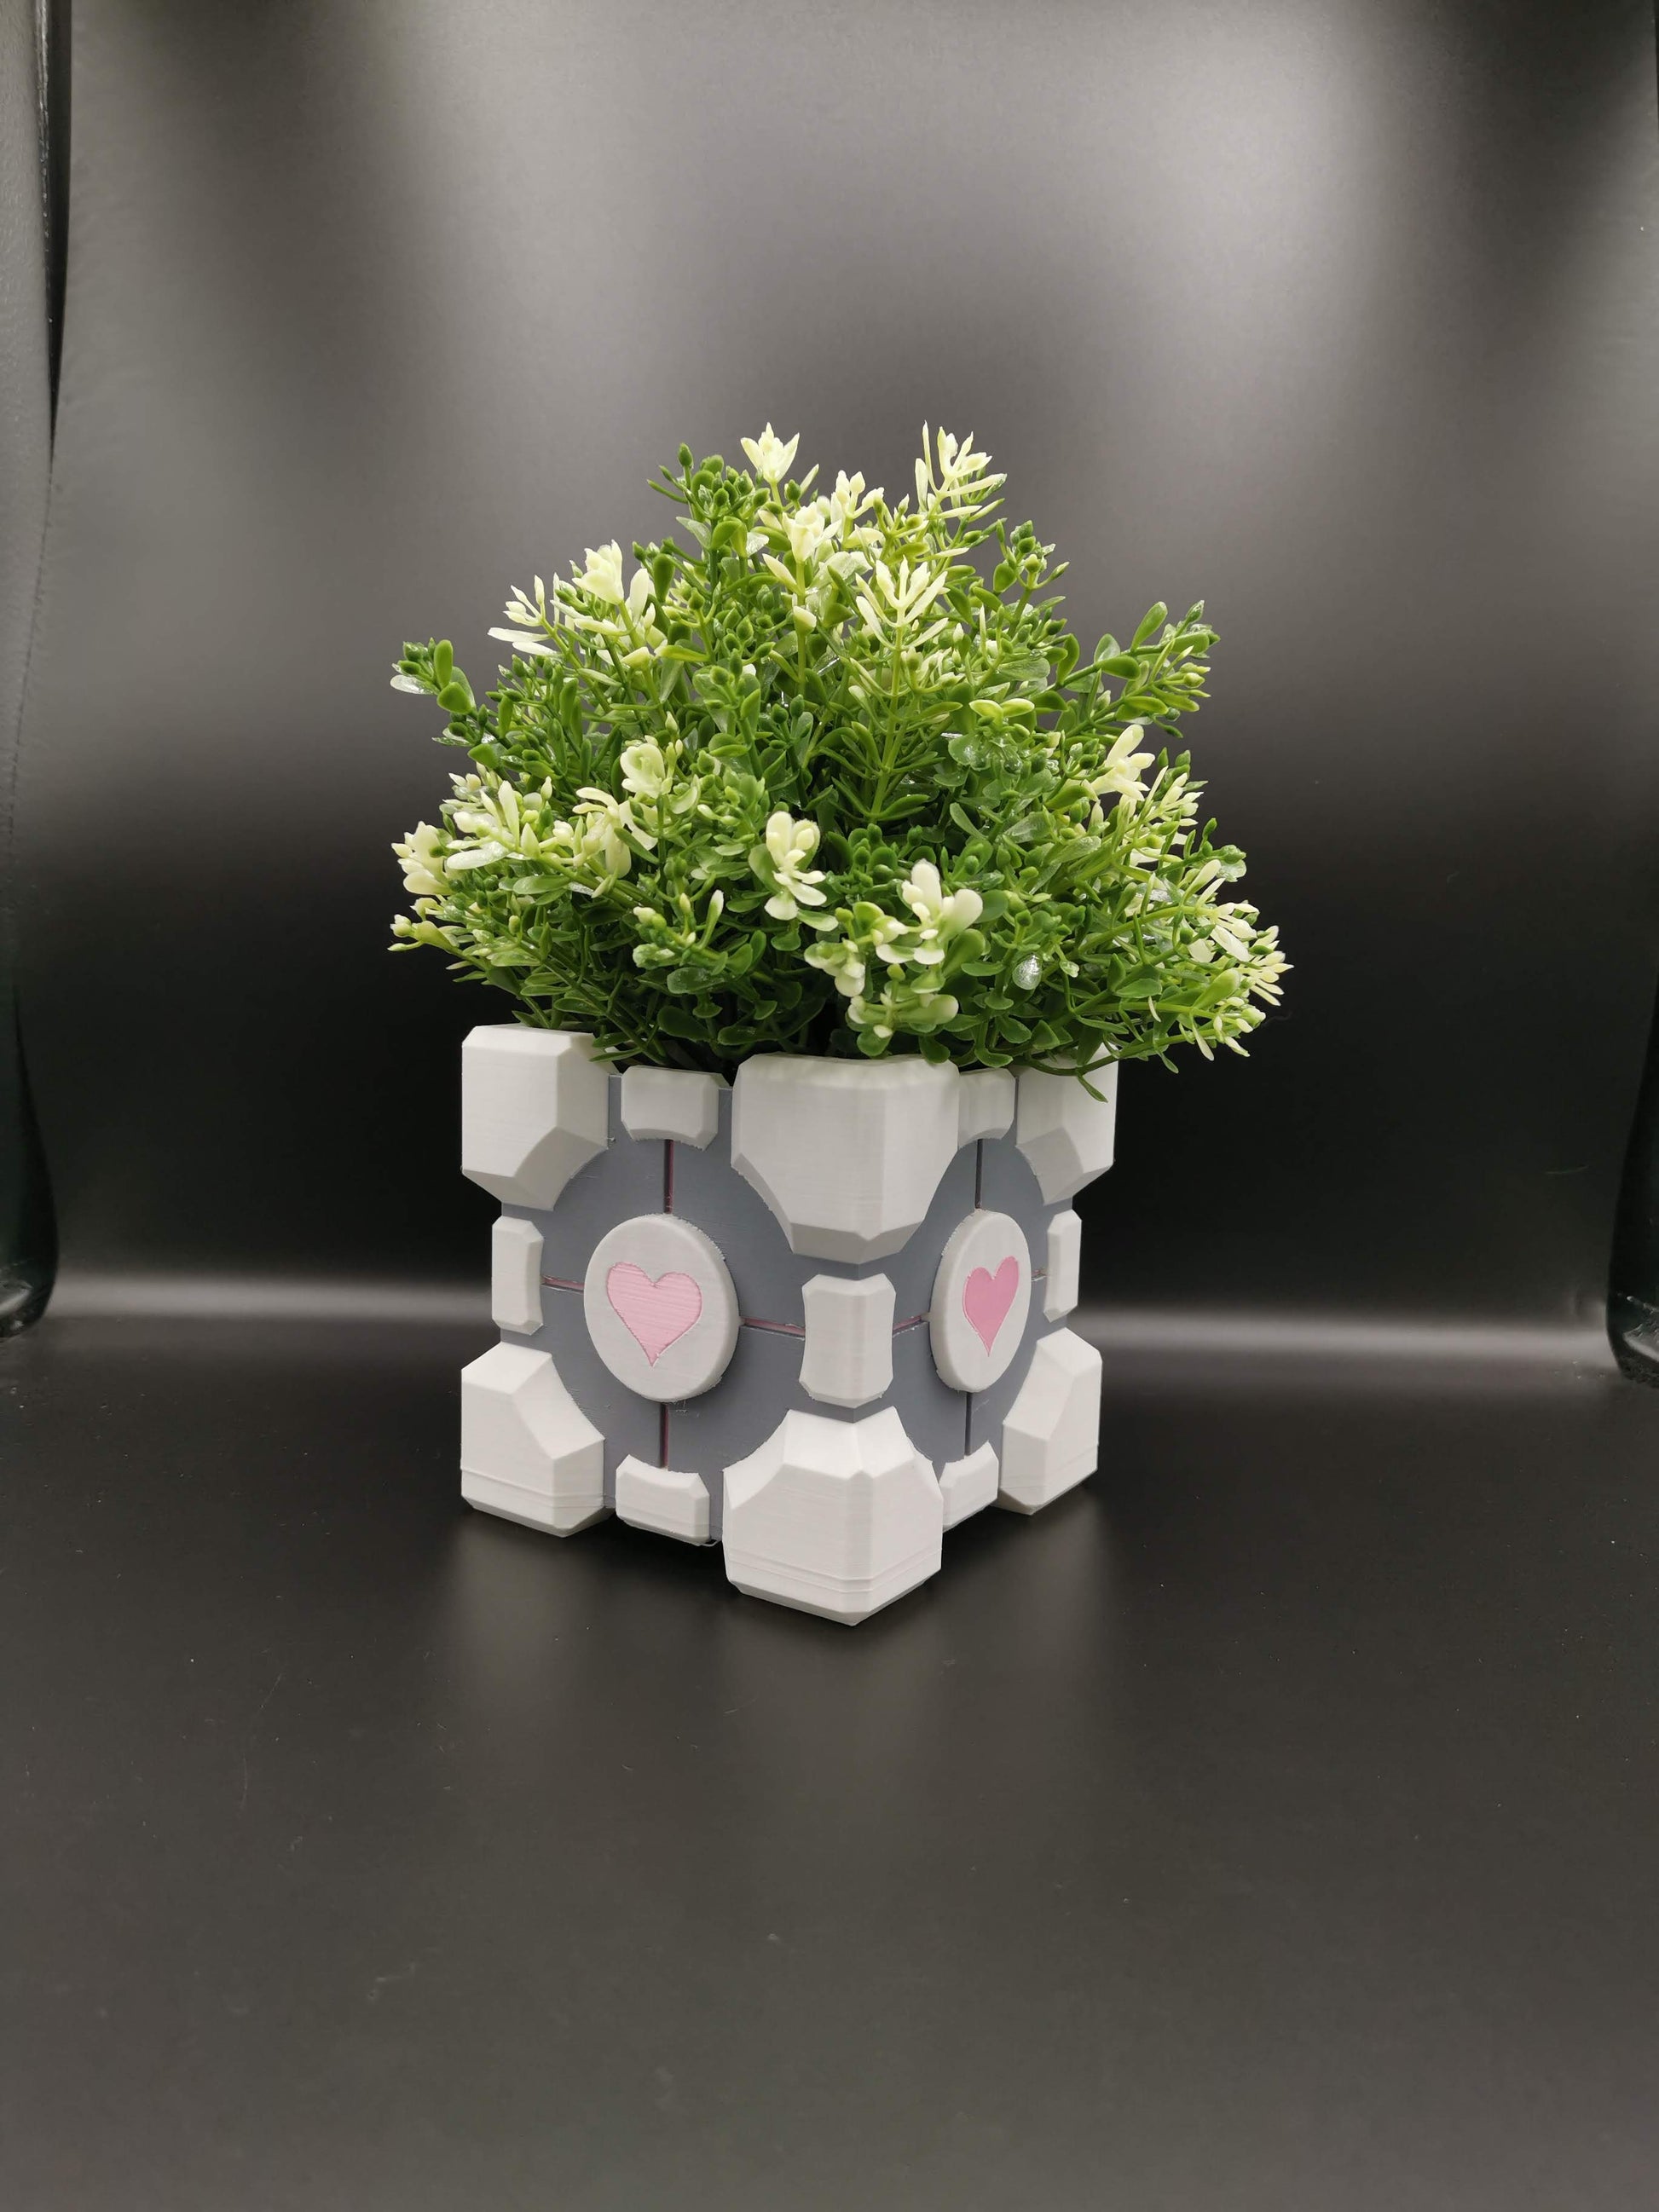 Companion Cube Portal planter with plant from front angle